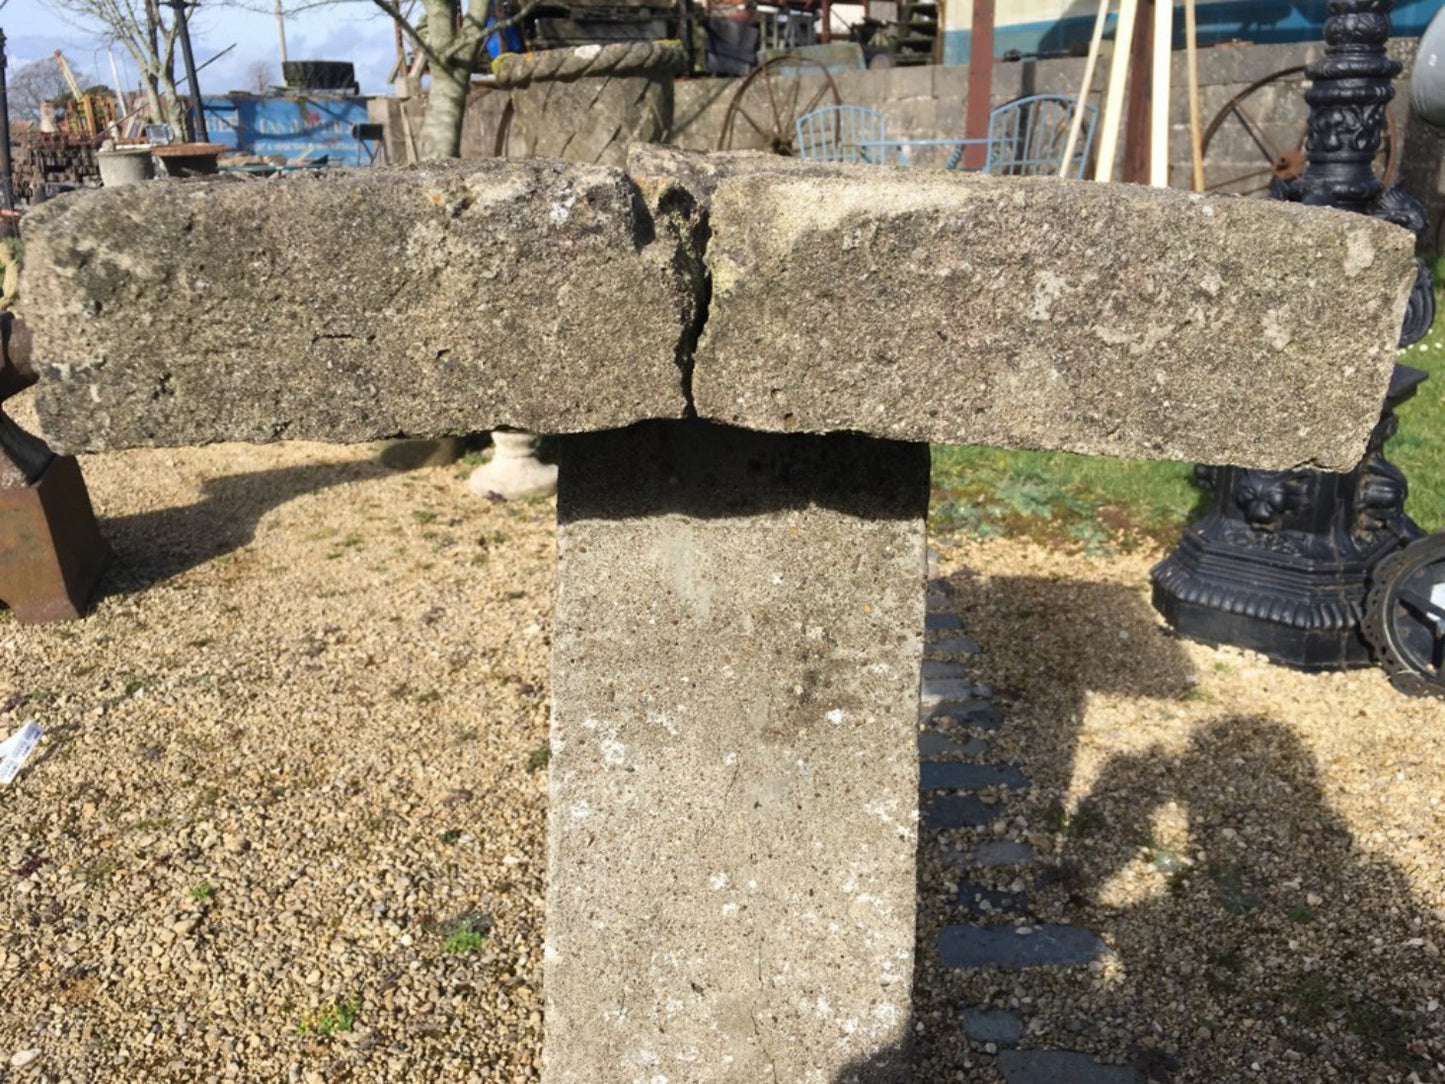 Salvaged Old Concrete 2’9” Tall Weathered Square Bird Bath